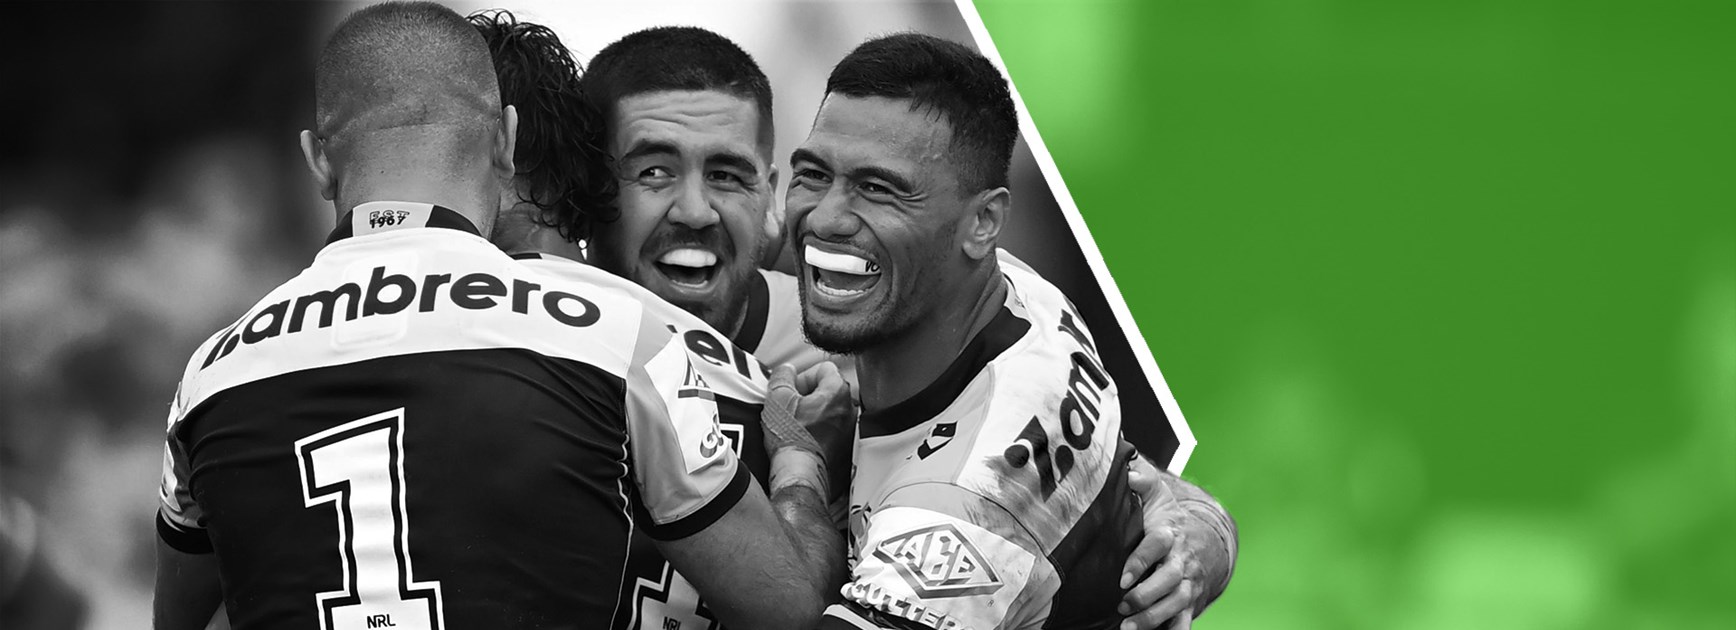 NRL Tipping: Expert tips for Round 1